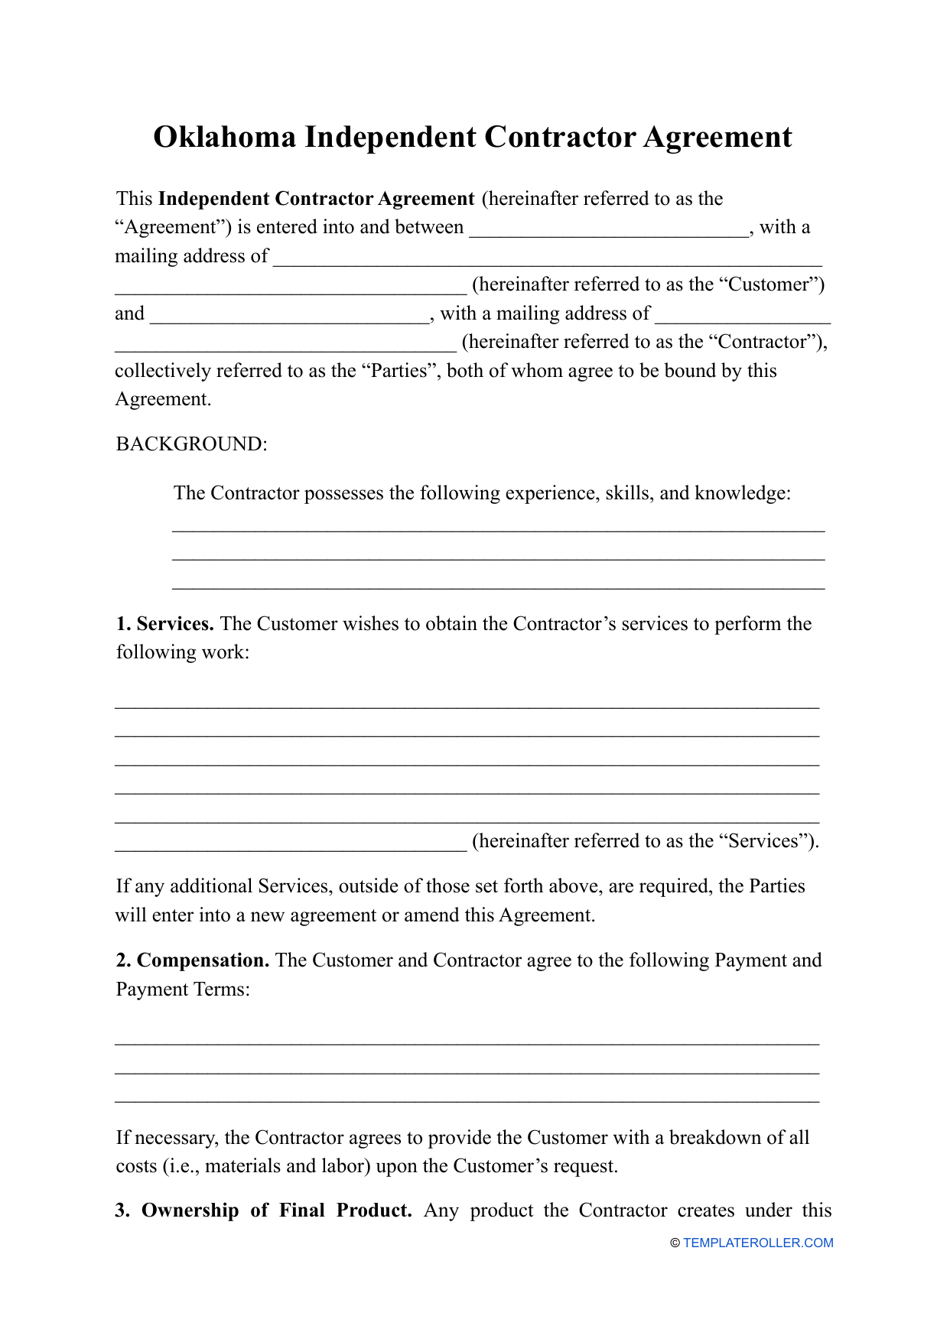 Independent Contractor Agreement Template - Oklahoma, Page 1